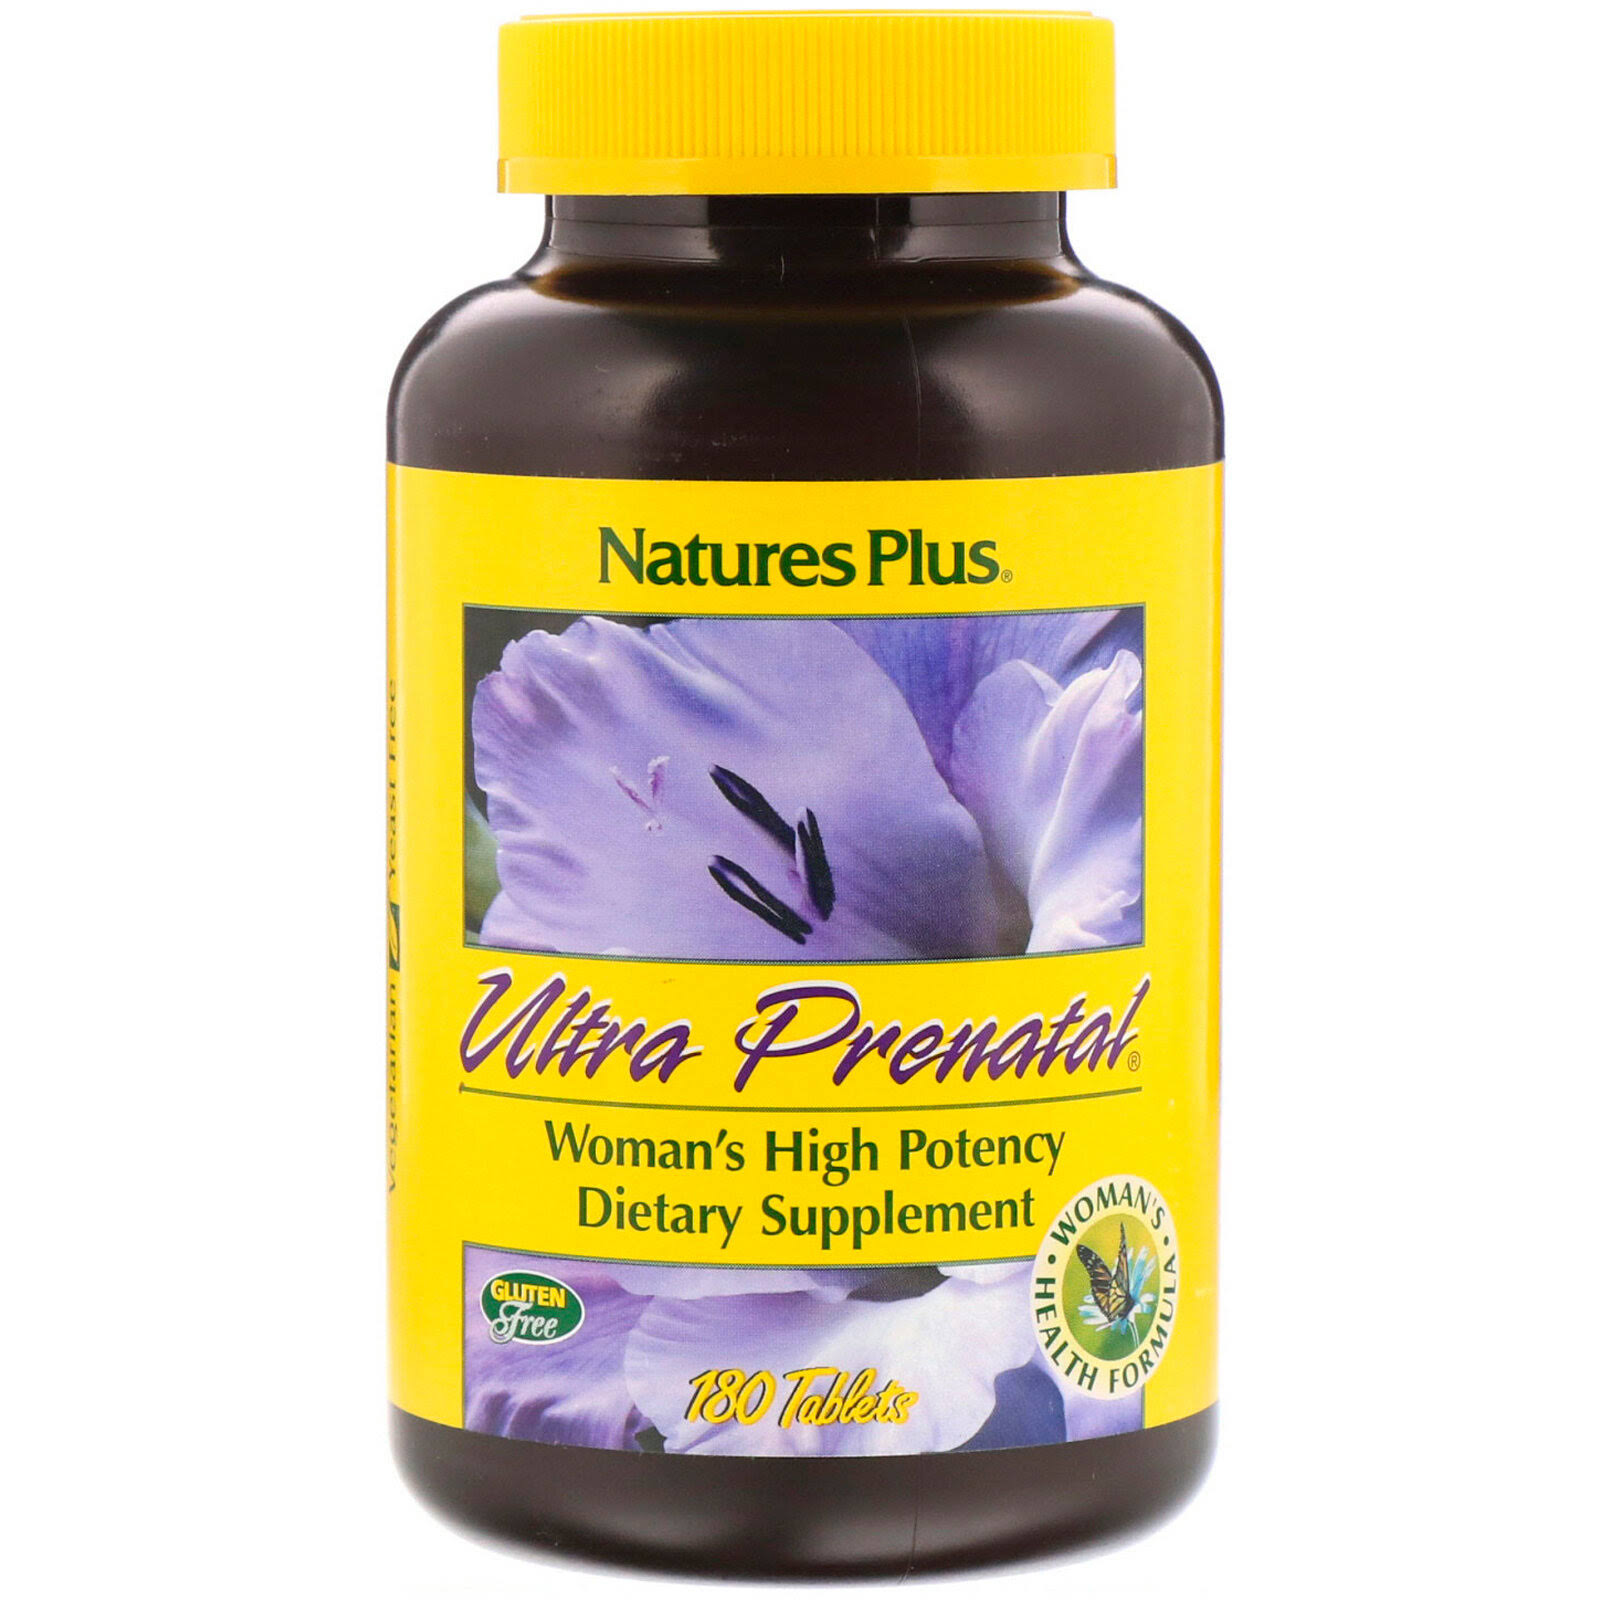 Nature's Plus Ultra Prenatal Dietary Supplement - 180 Tablets